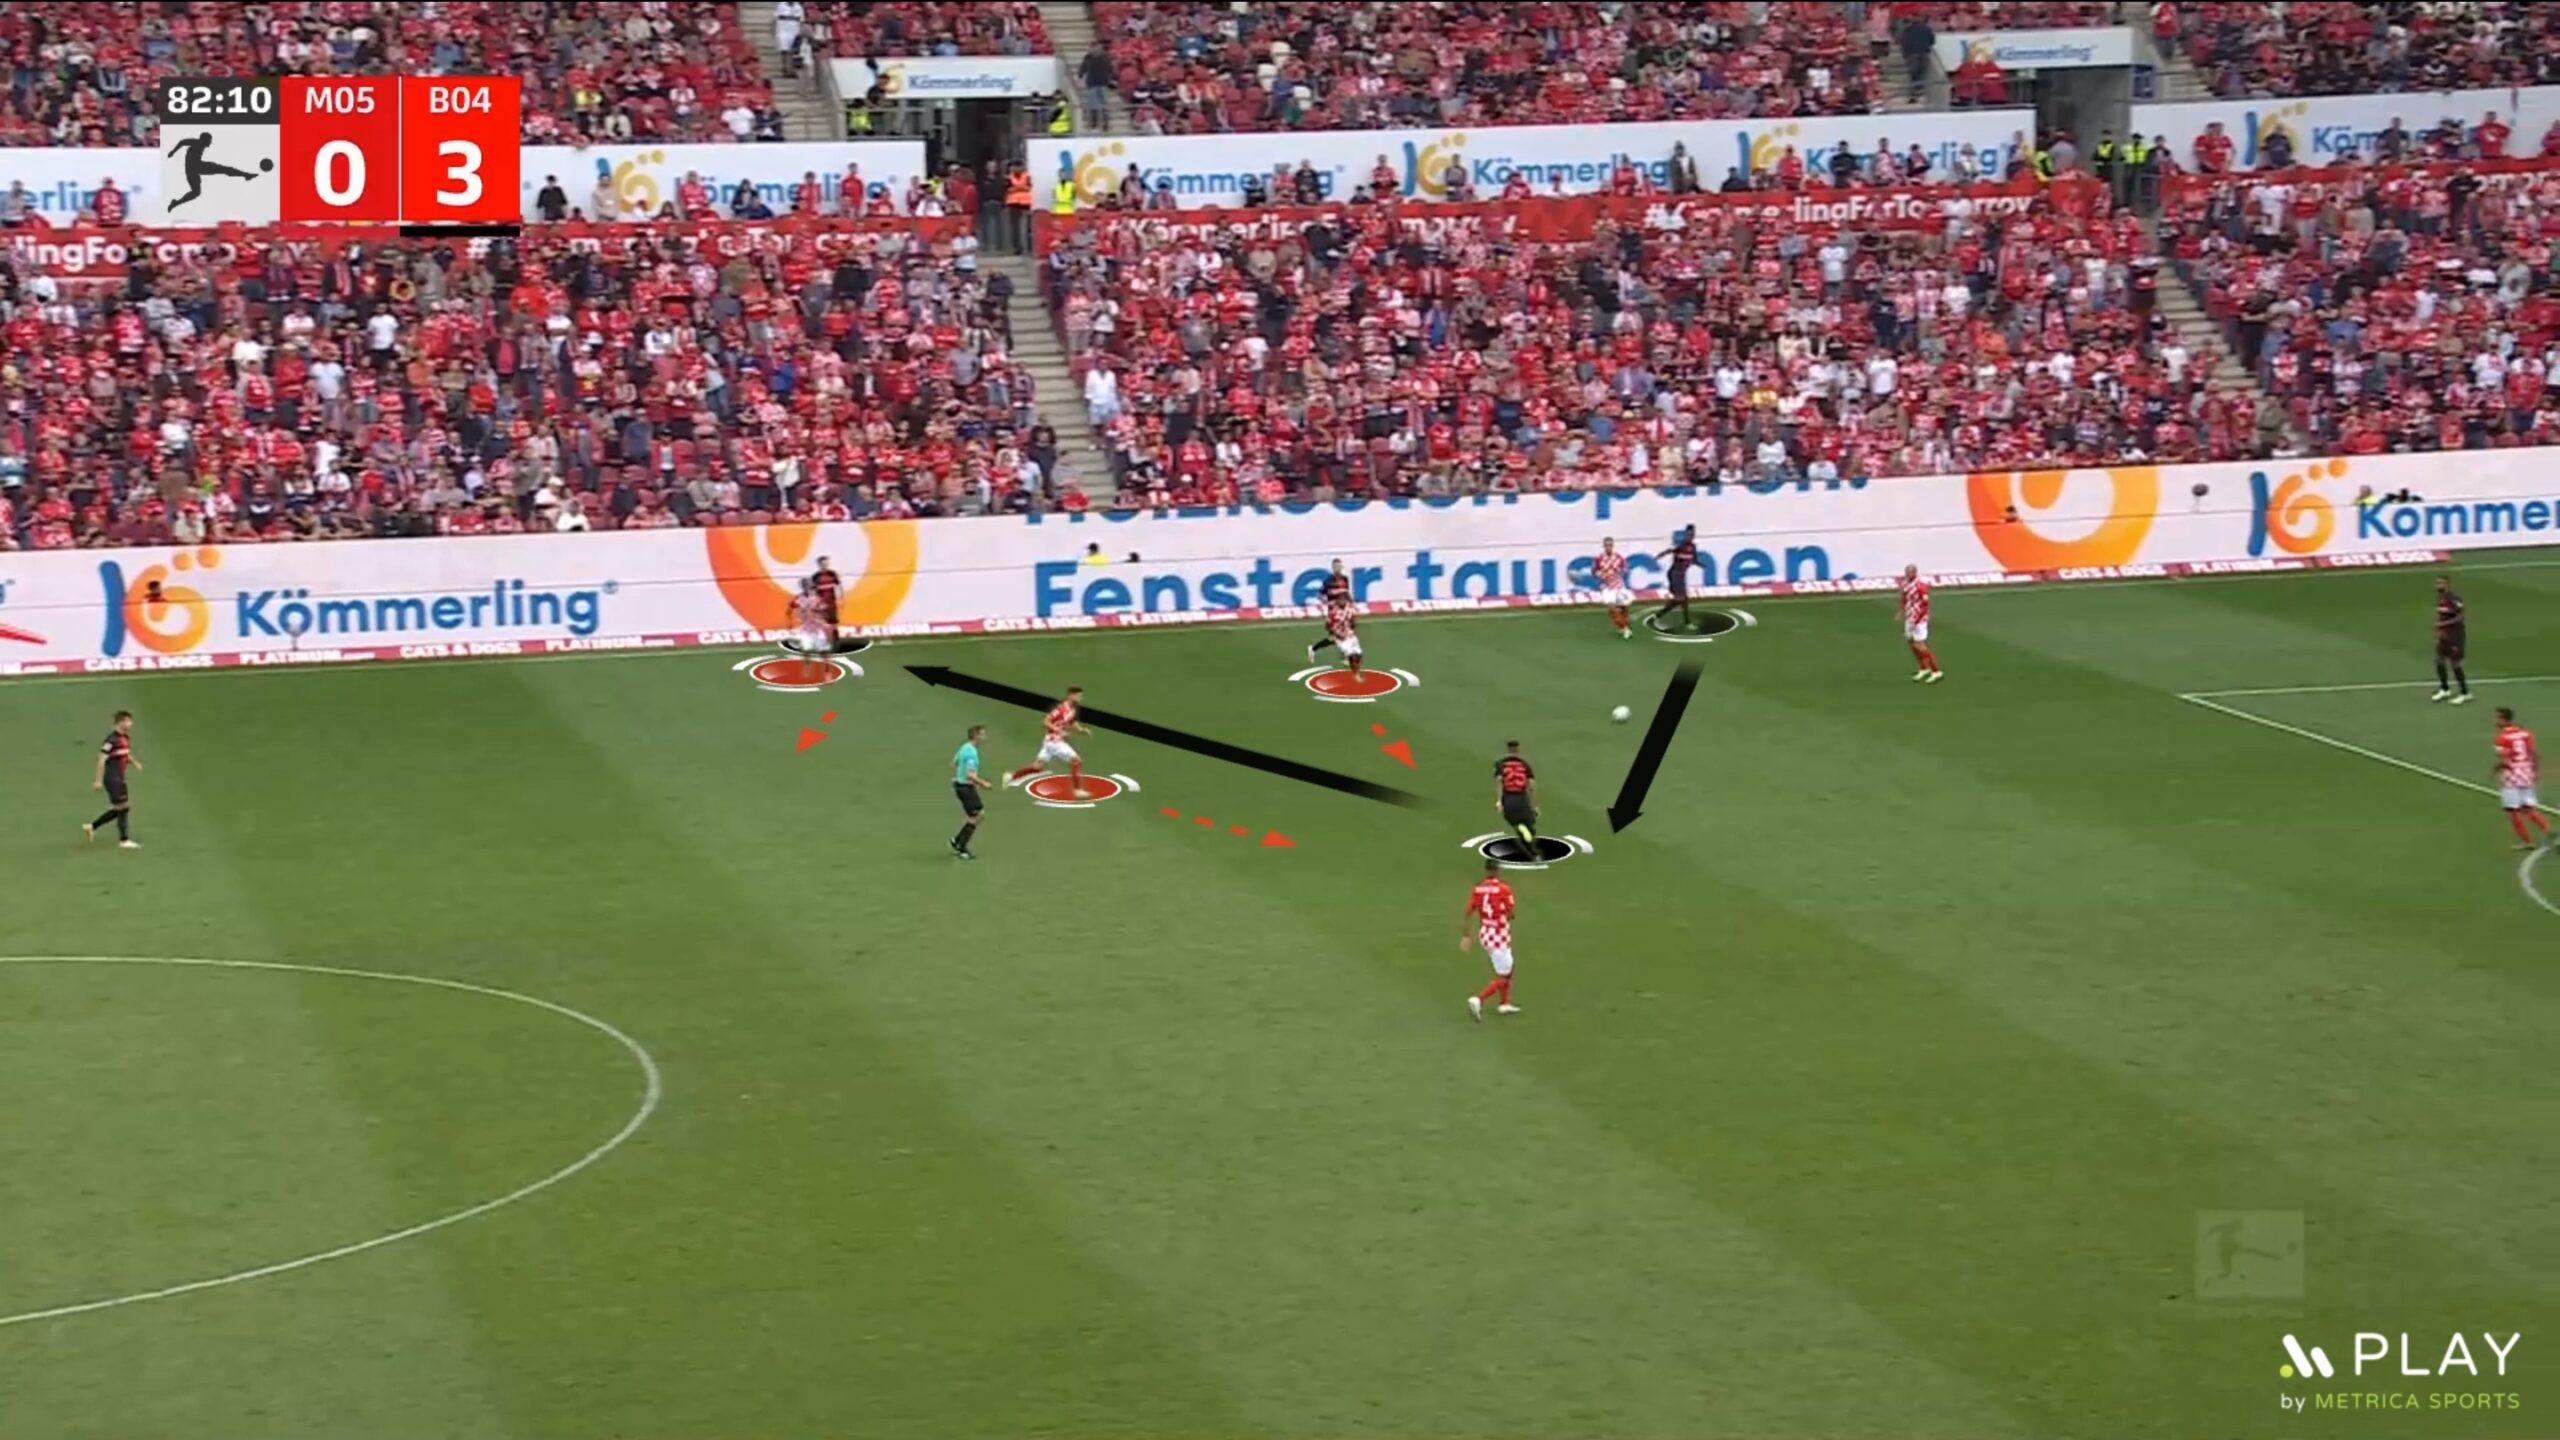 Key Concepts for Good Ball Circulation. Outside-Inside-Outside. Bayer Leverkusen (Xabi Alonso) understands when to play inside and when to play outside, making the opponent's block shrink and open in width as they move the ball, and creating spaces.